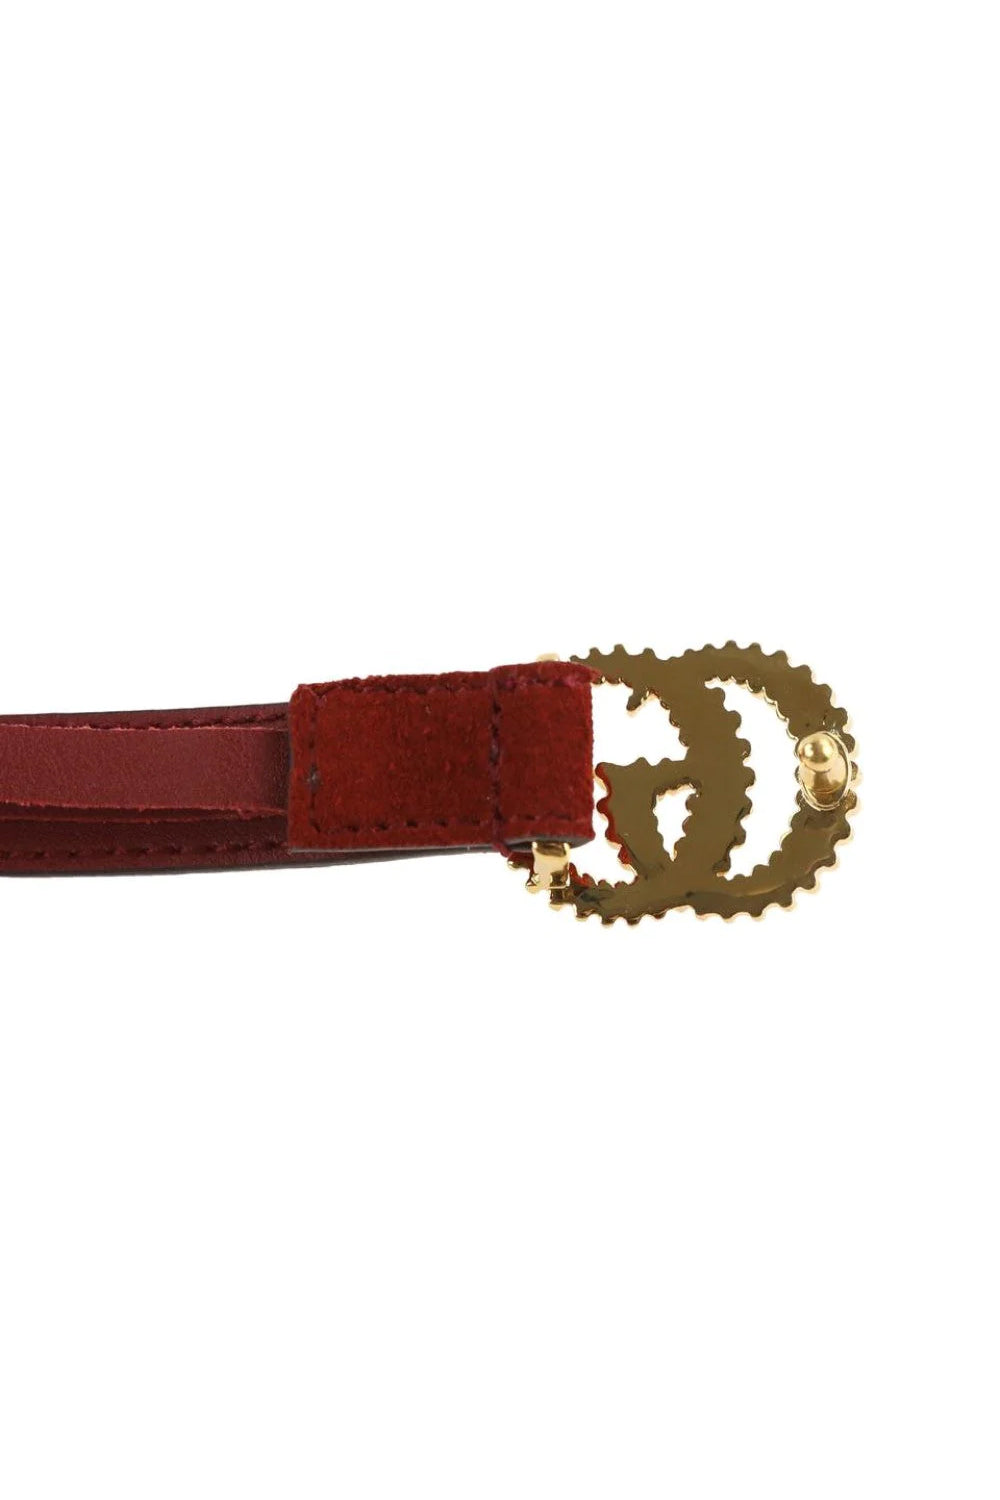 Gucci Marmont Red Suede Torchon GG Buckle Belt